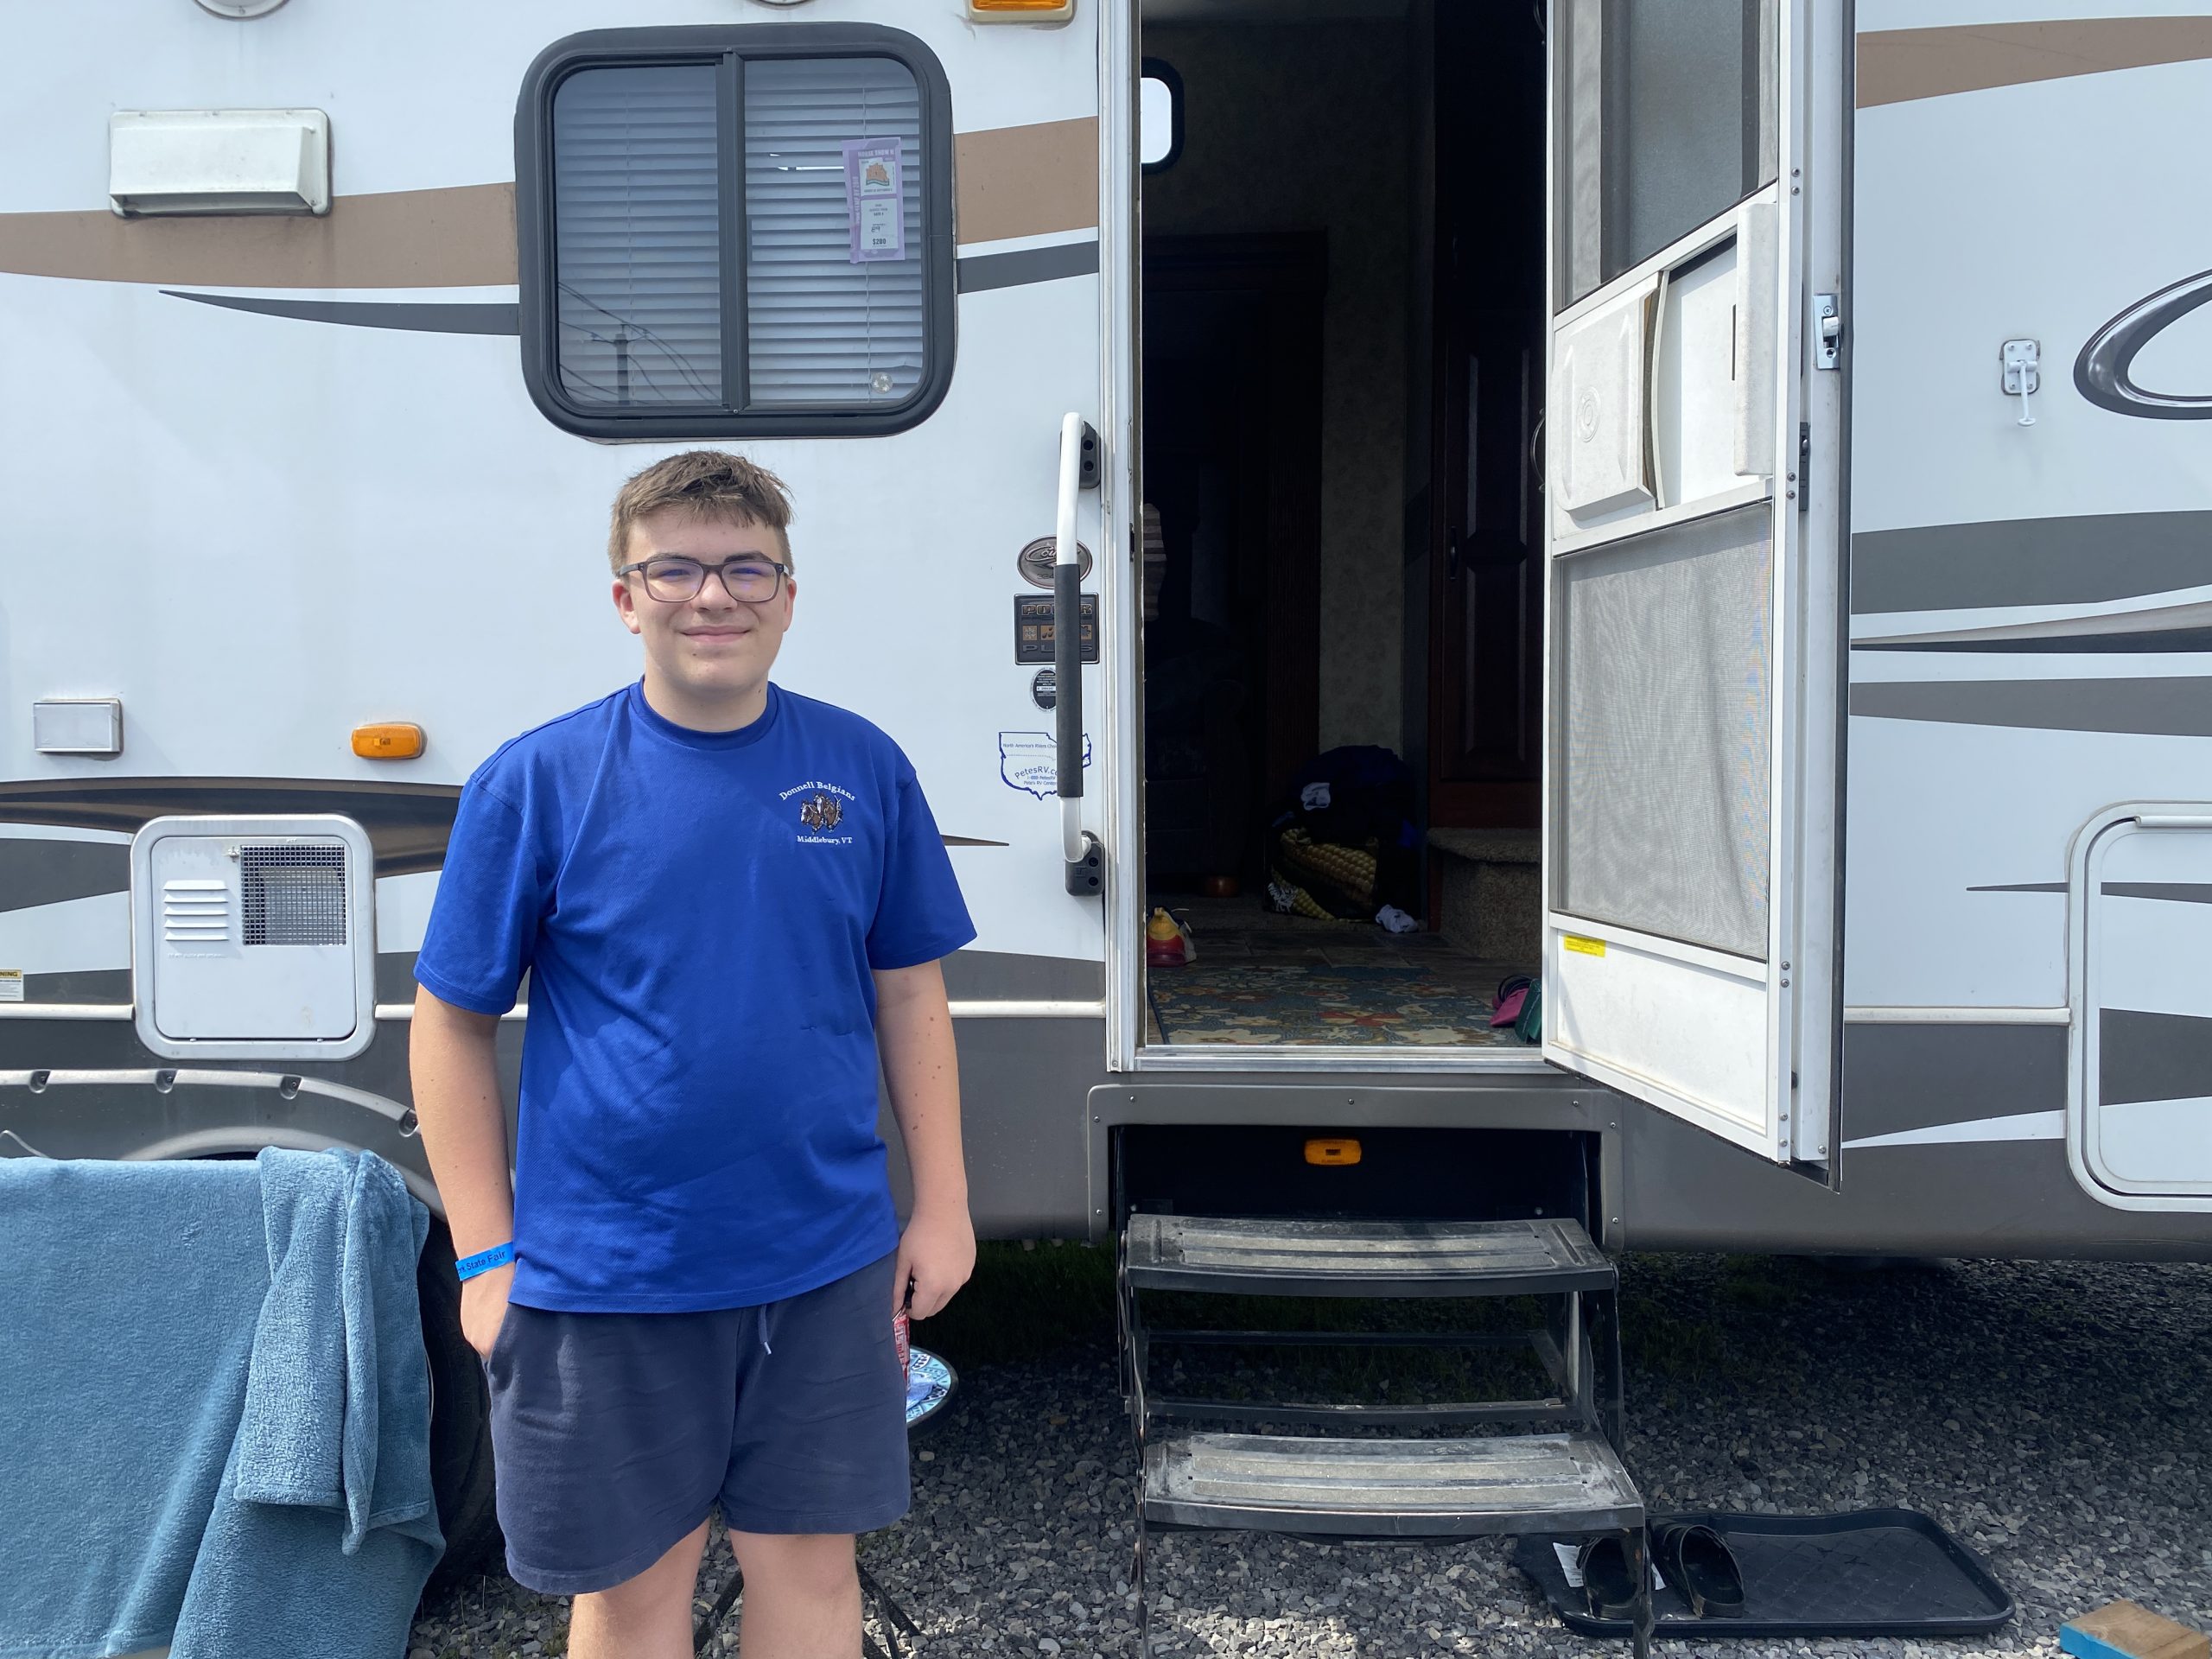 Will Deering outside his family’s RV sporting the family business uniform at the at the 2022 New York State Fair